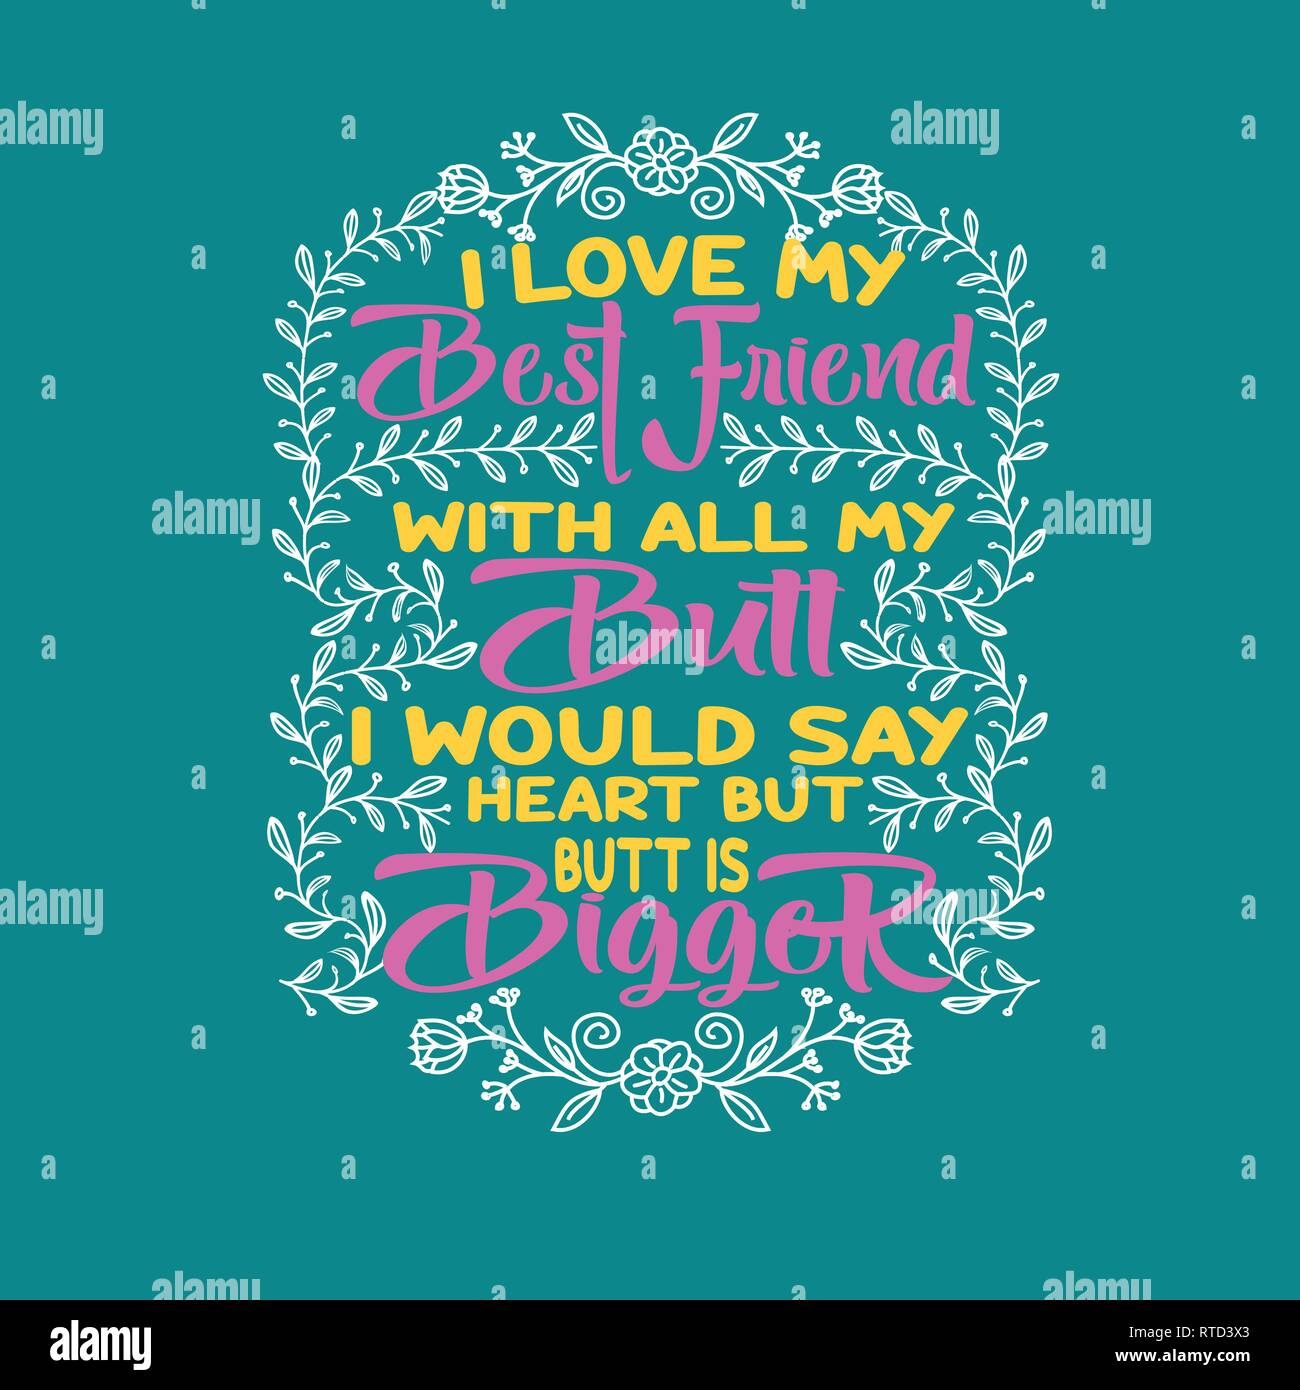 Friendship Quote and saying. I love my best friend. Stock Vector